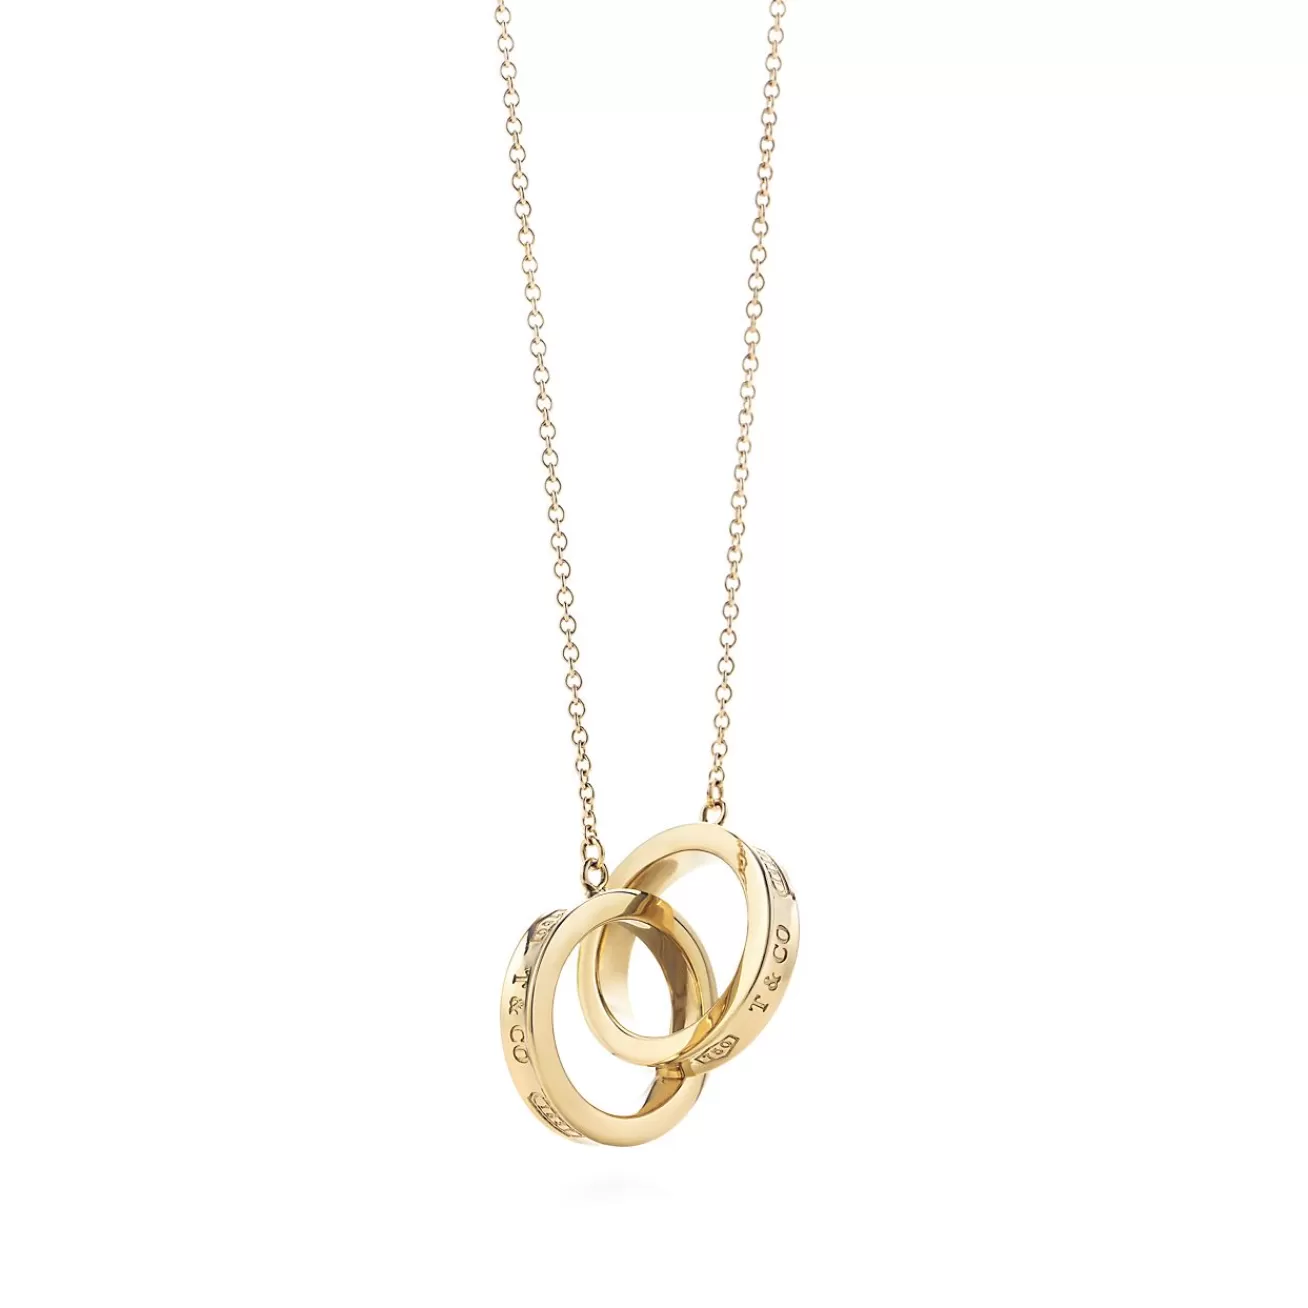 Tiffany & Co. Tiffany 1837® Interlocking Circles Pendant in Yellow Gold, Small | ^ Necklaces & Pendants | Gifts for Her